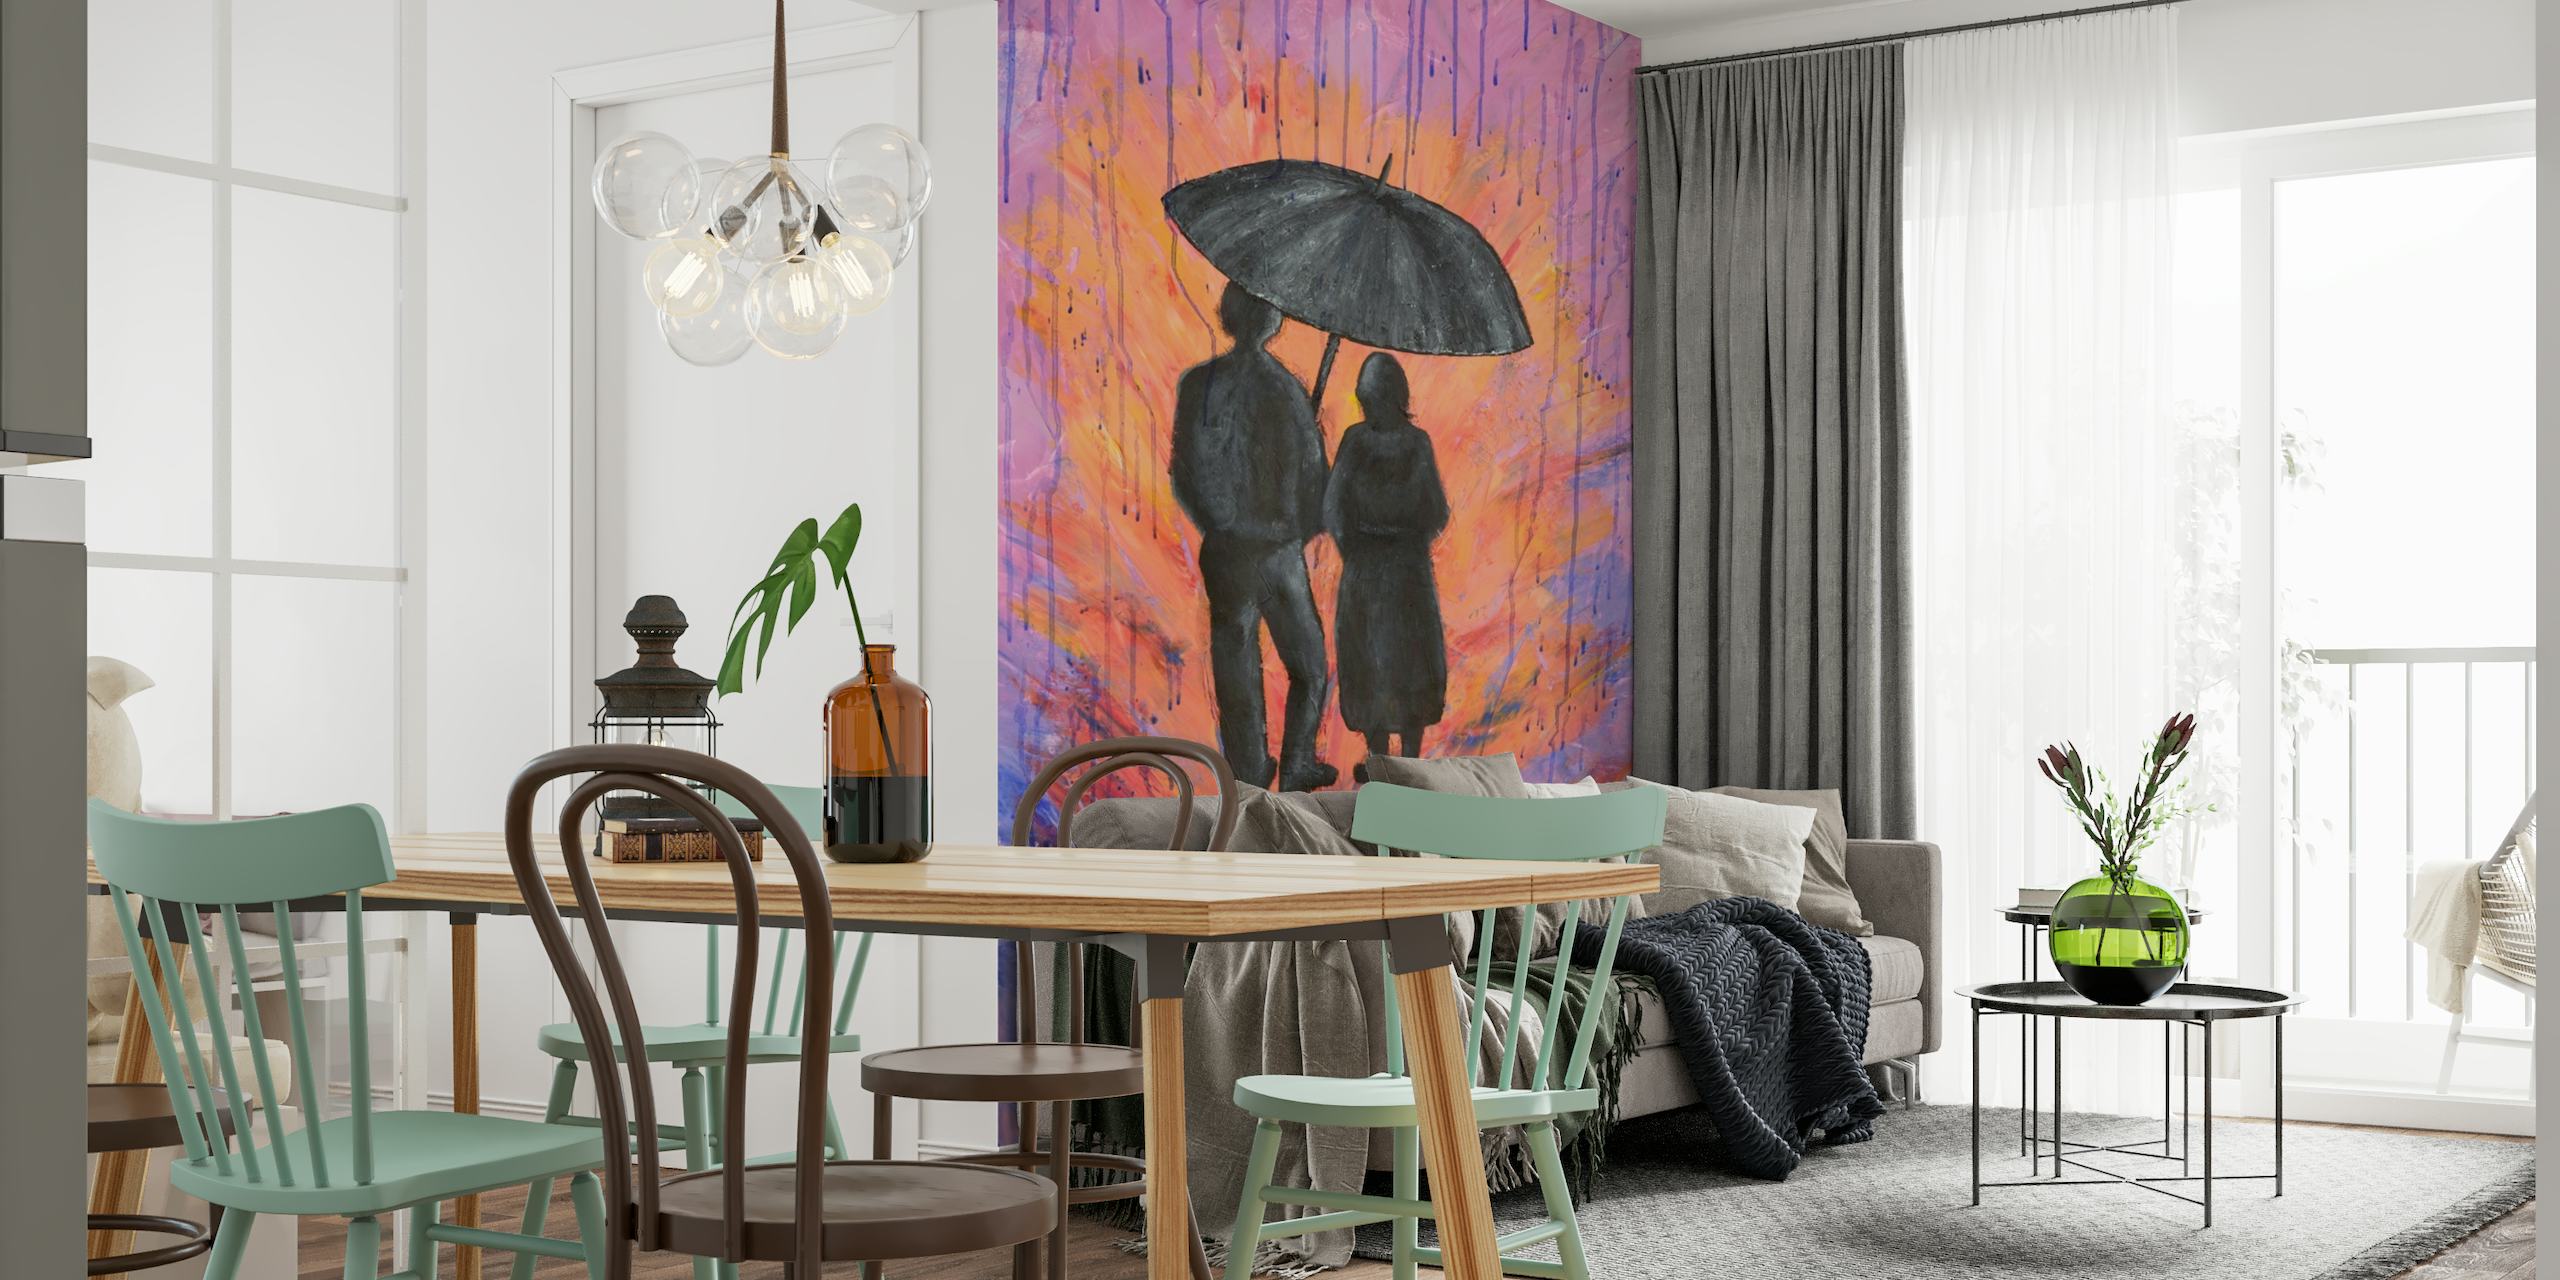 Silhouette of a couple under an umbrella with a backdrop of fiery and purple tones representing rain